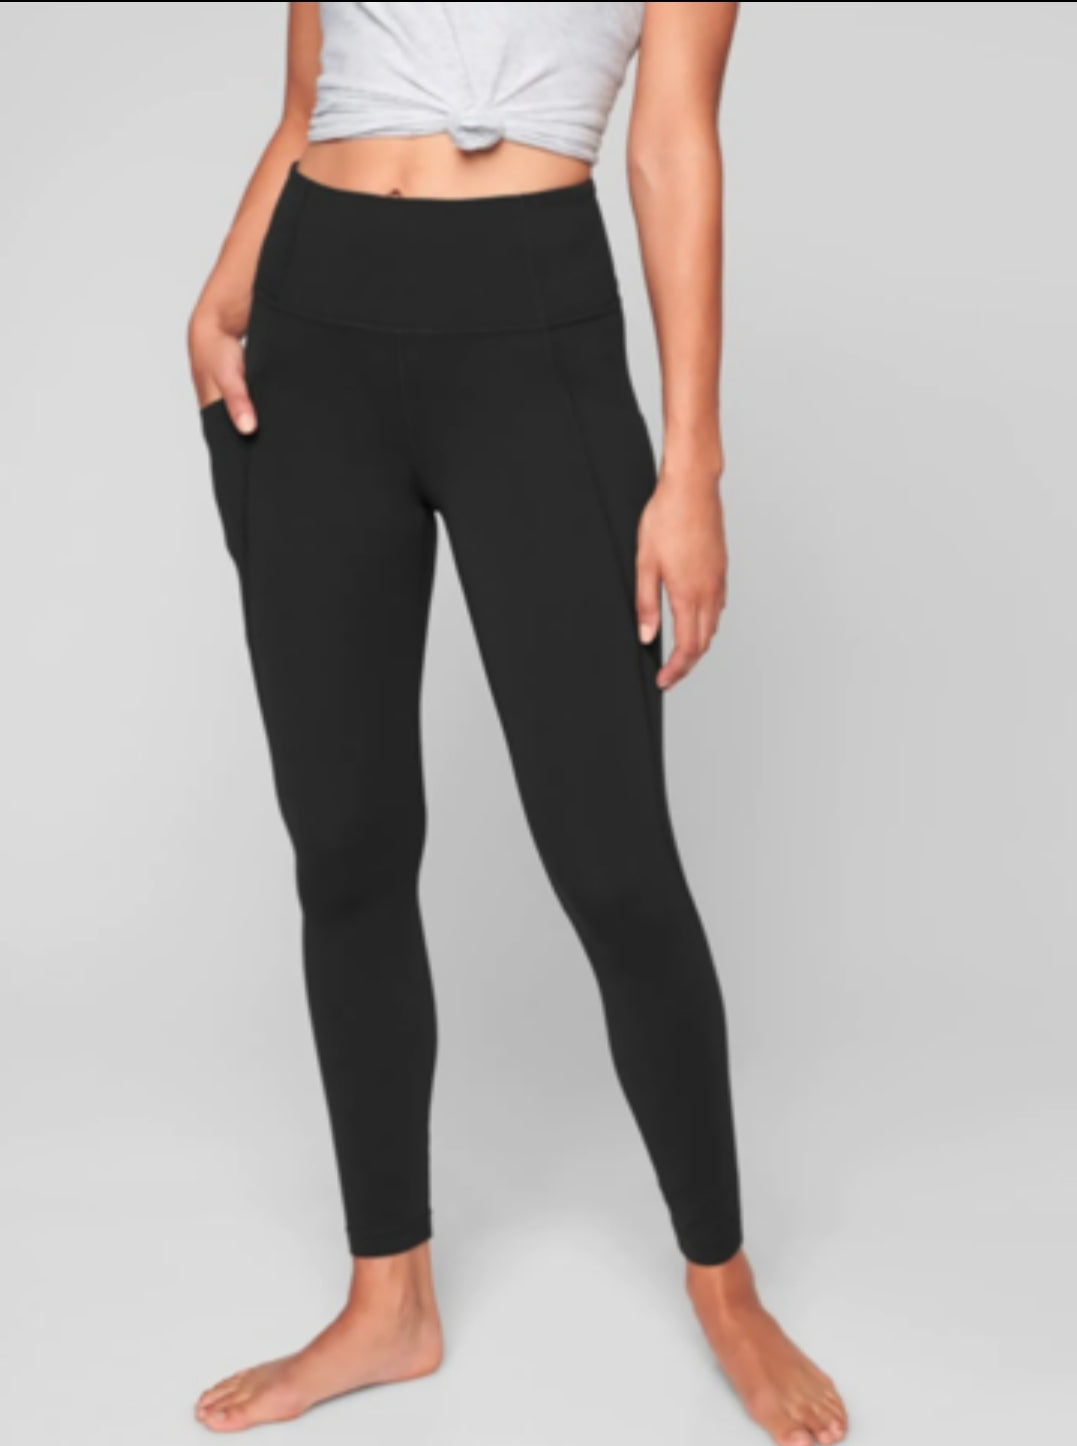 Black leggings with pockets kids and adults